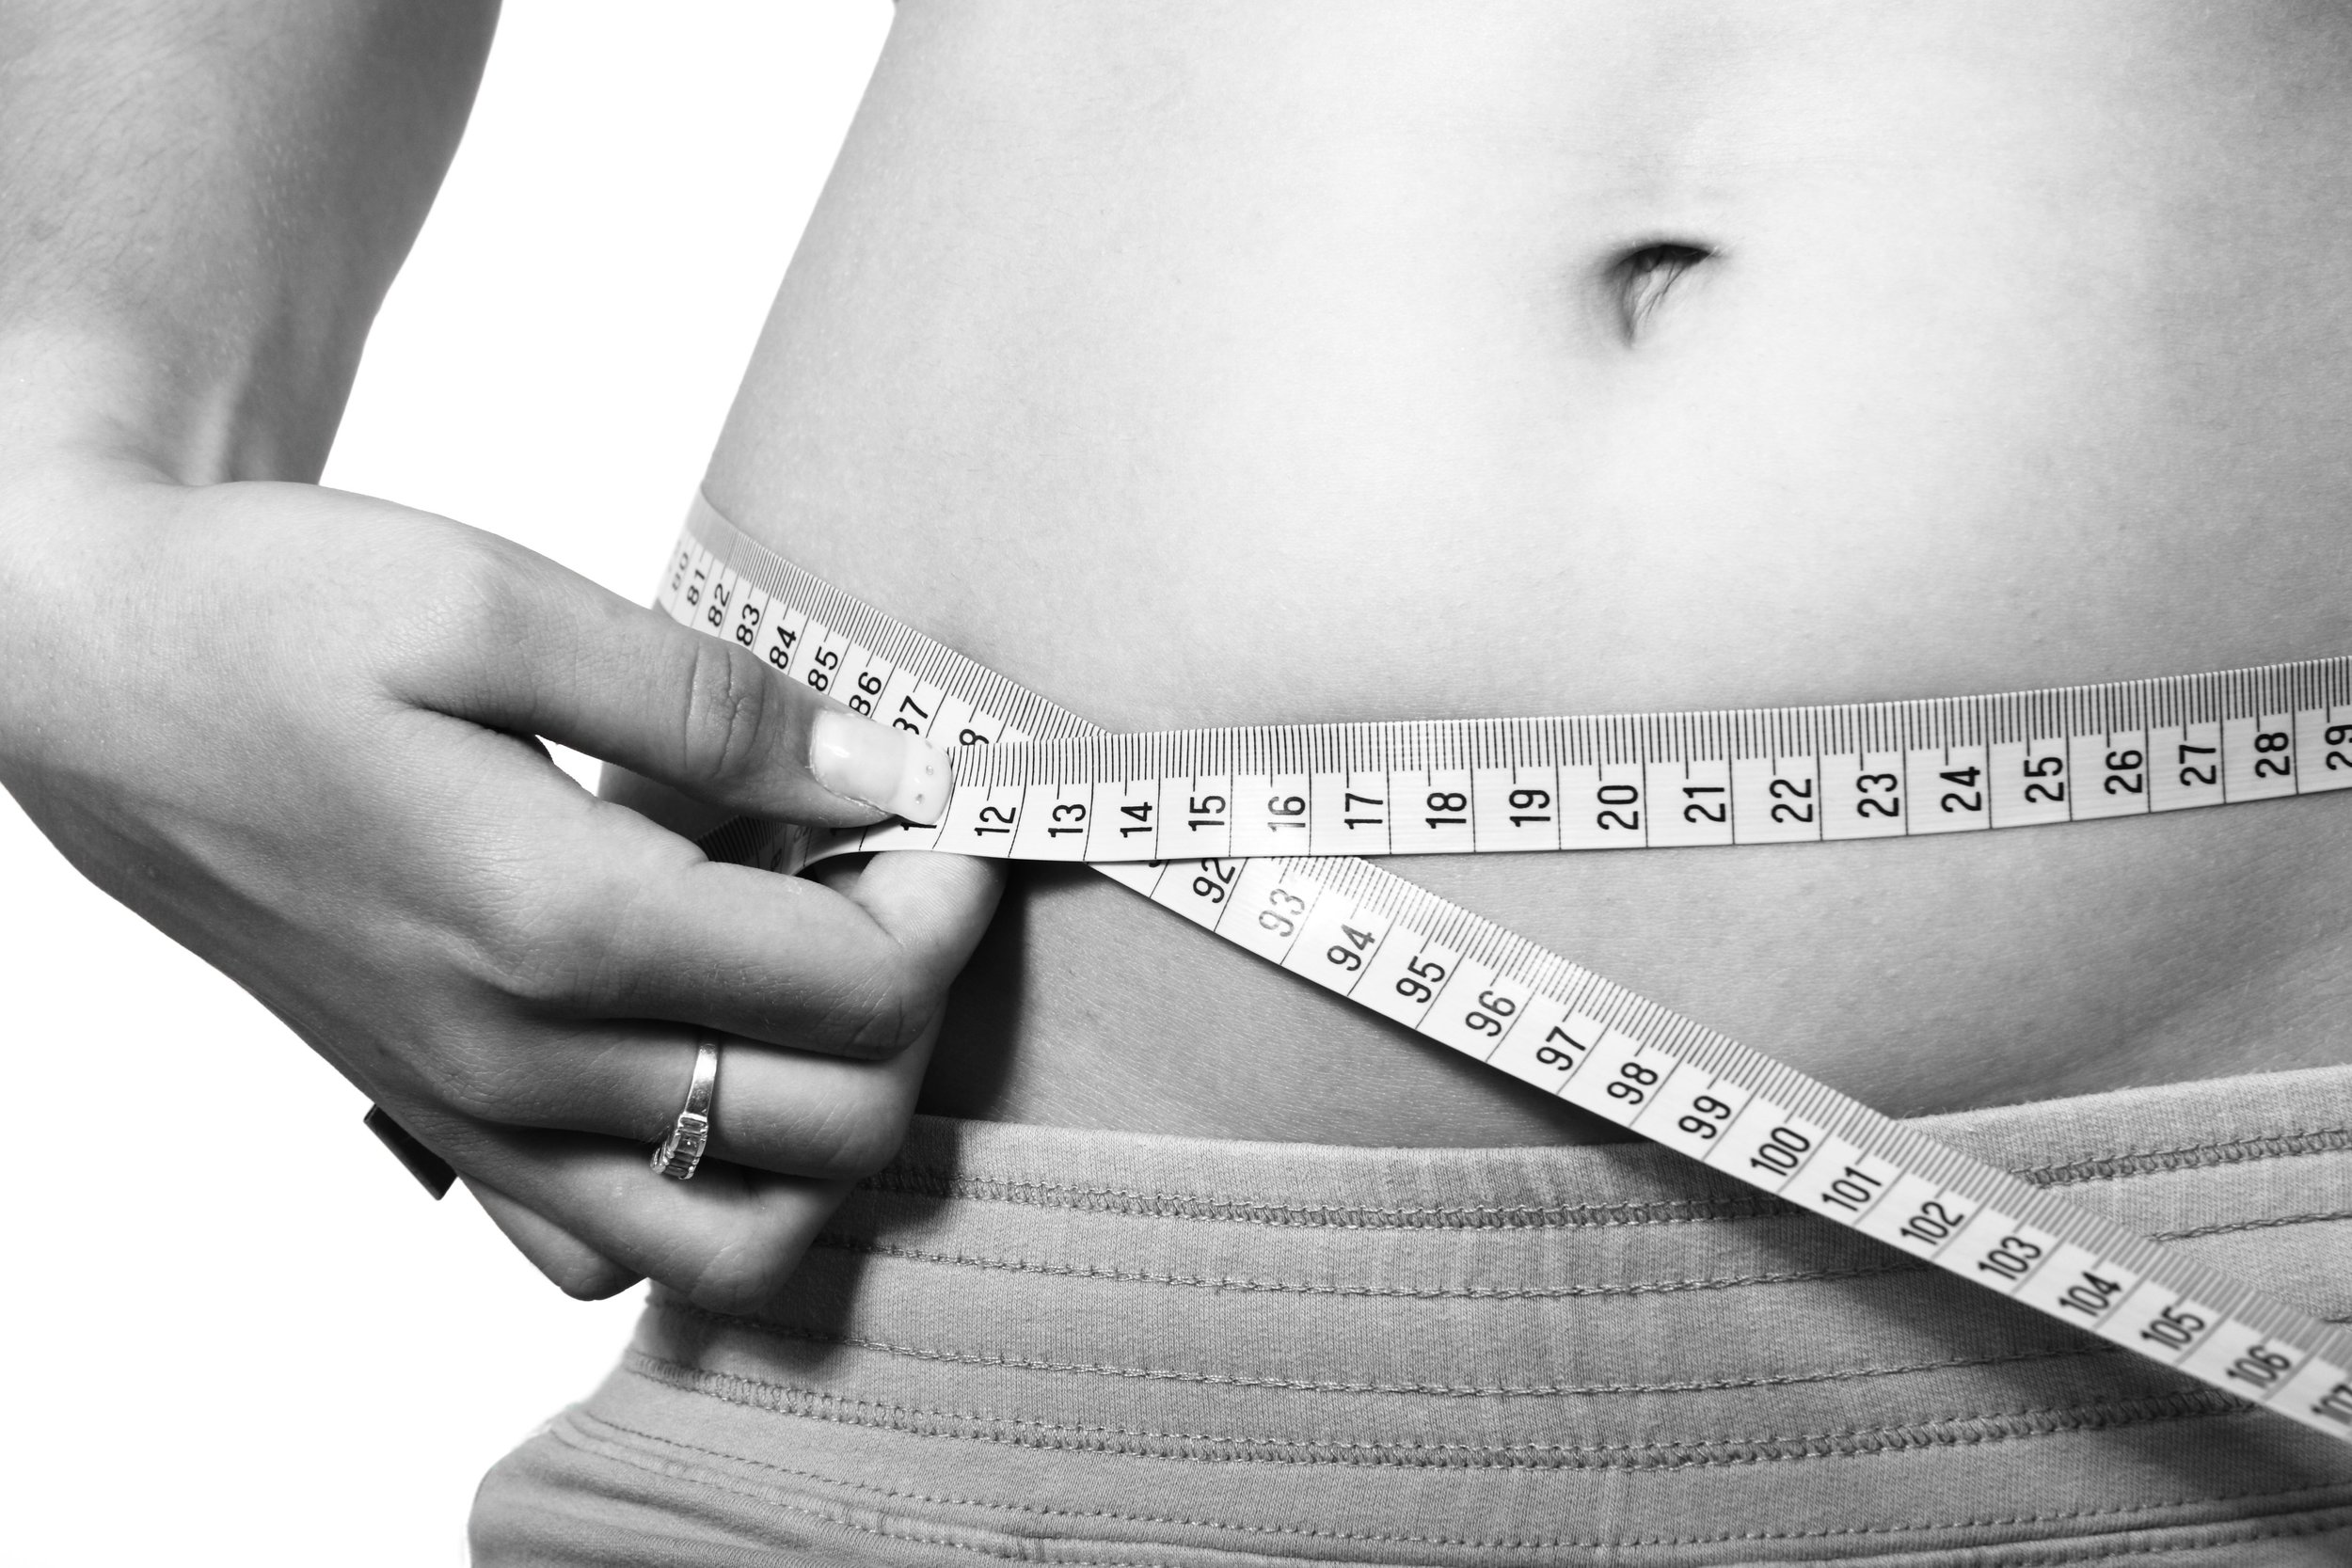 What is the Ideal Body Fat Percentage?